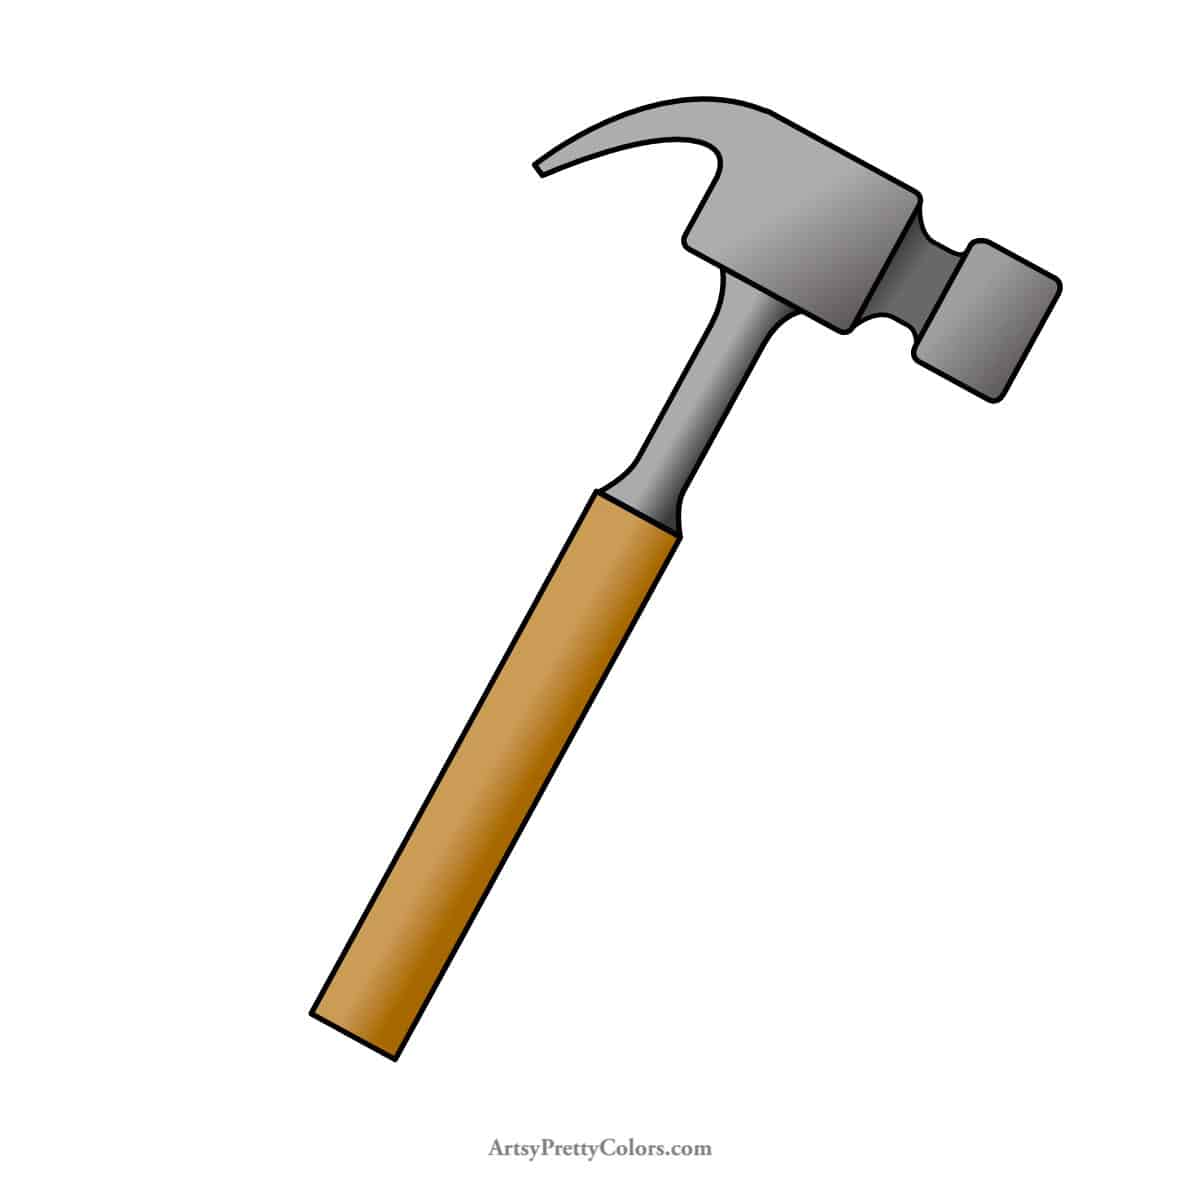 final line drawing colored for how to draw a hammer